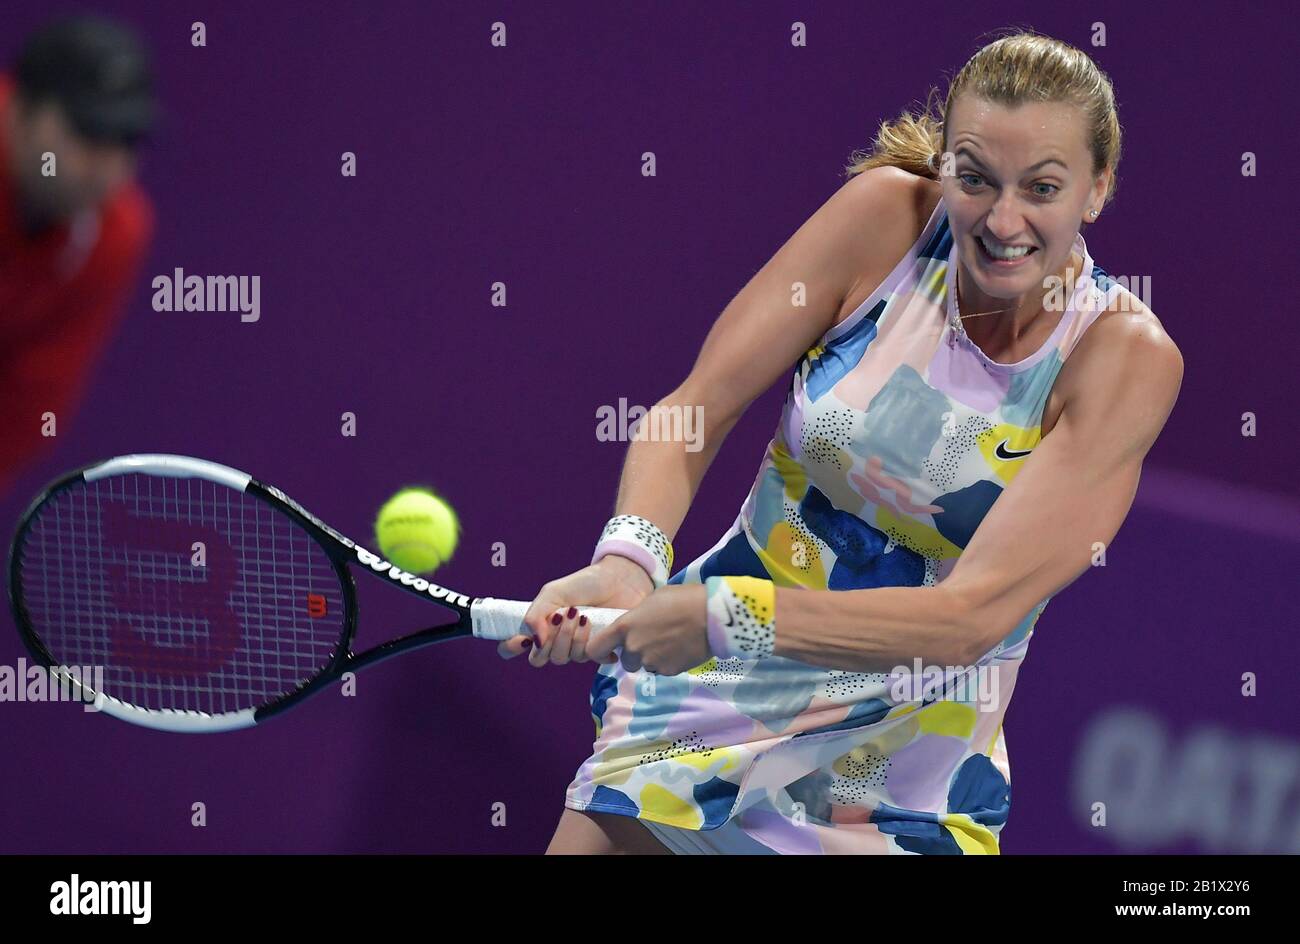 Doha, Qatar. 27th Feb, 2020. Petra Kvitova of the Czech Republic hits a  return during the women's singles quarterfinal match against Ons Jabeur of  Tunisia at the 2020 WTA Qatar Open in